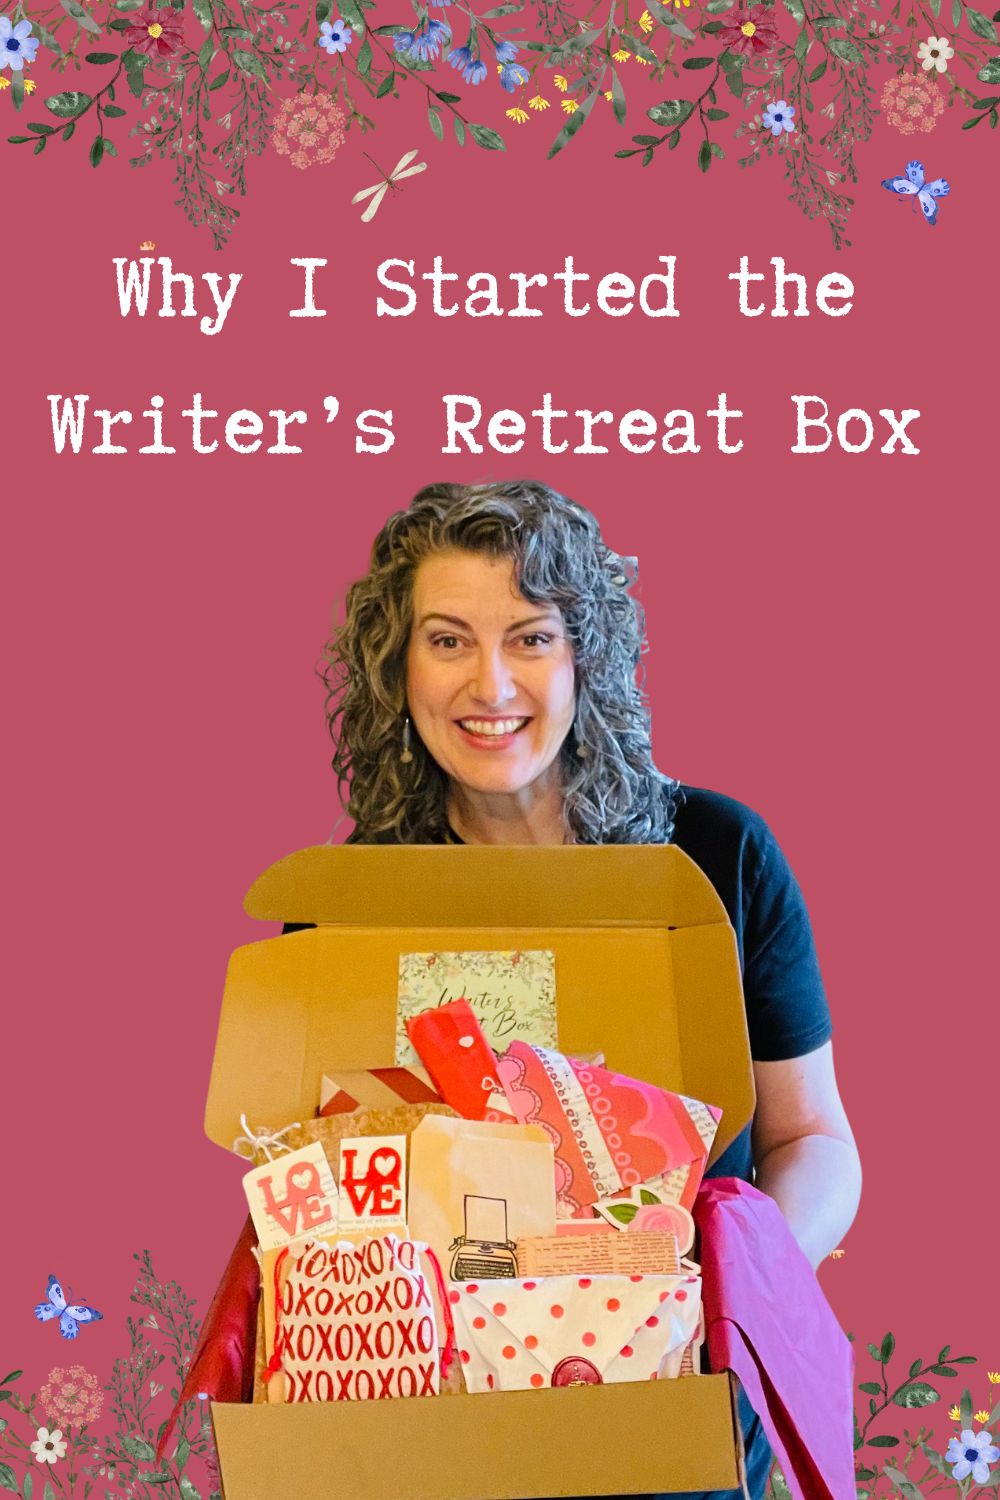 Why I Started the Writer’s Retreat Box